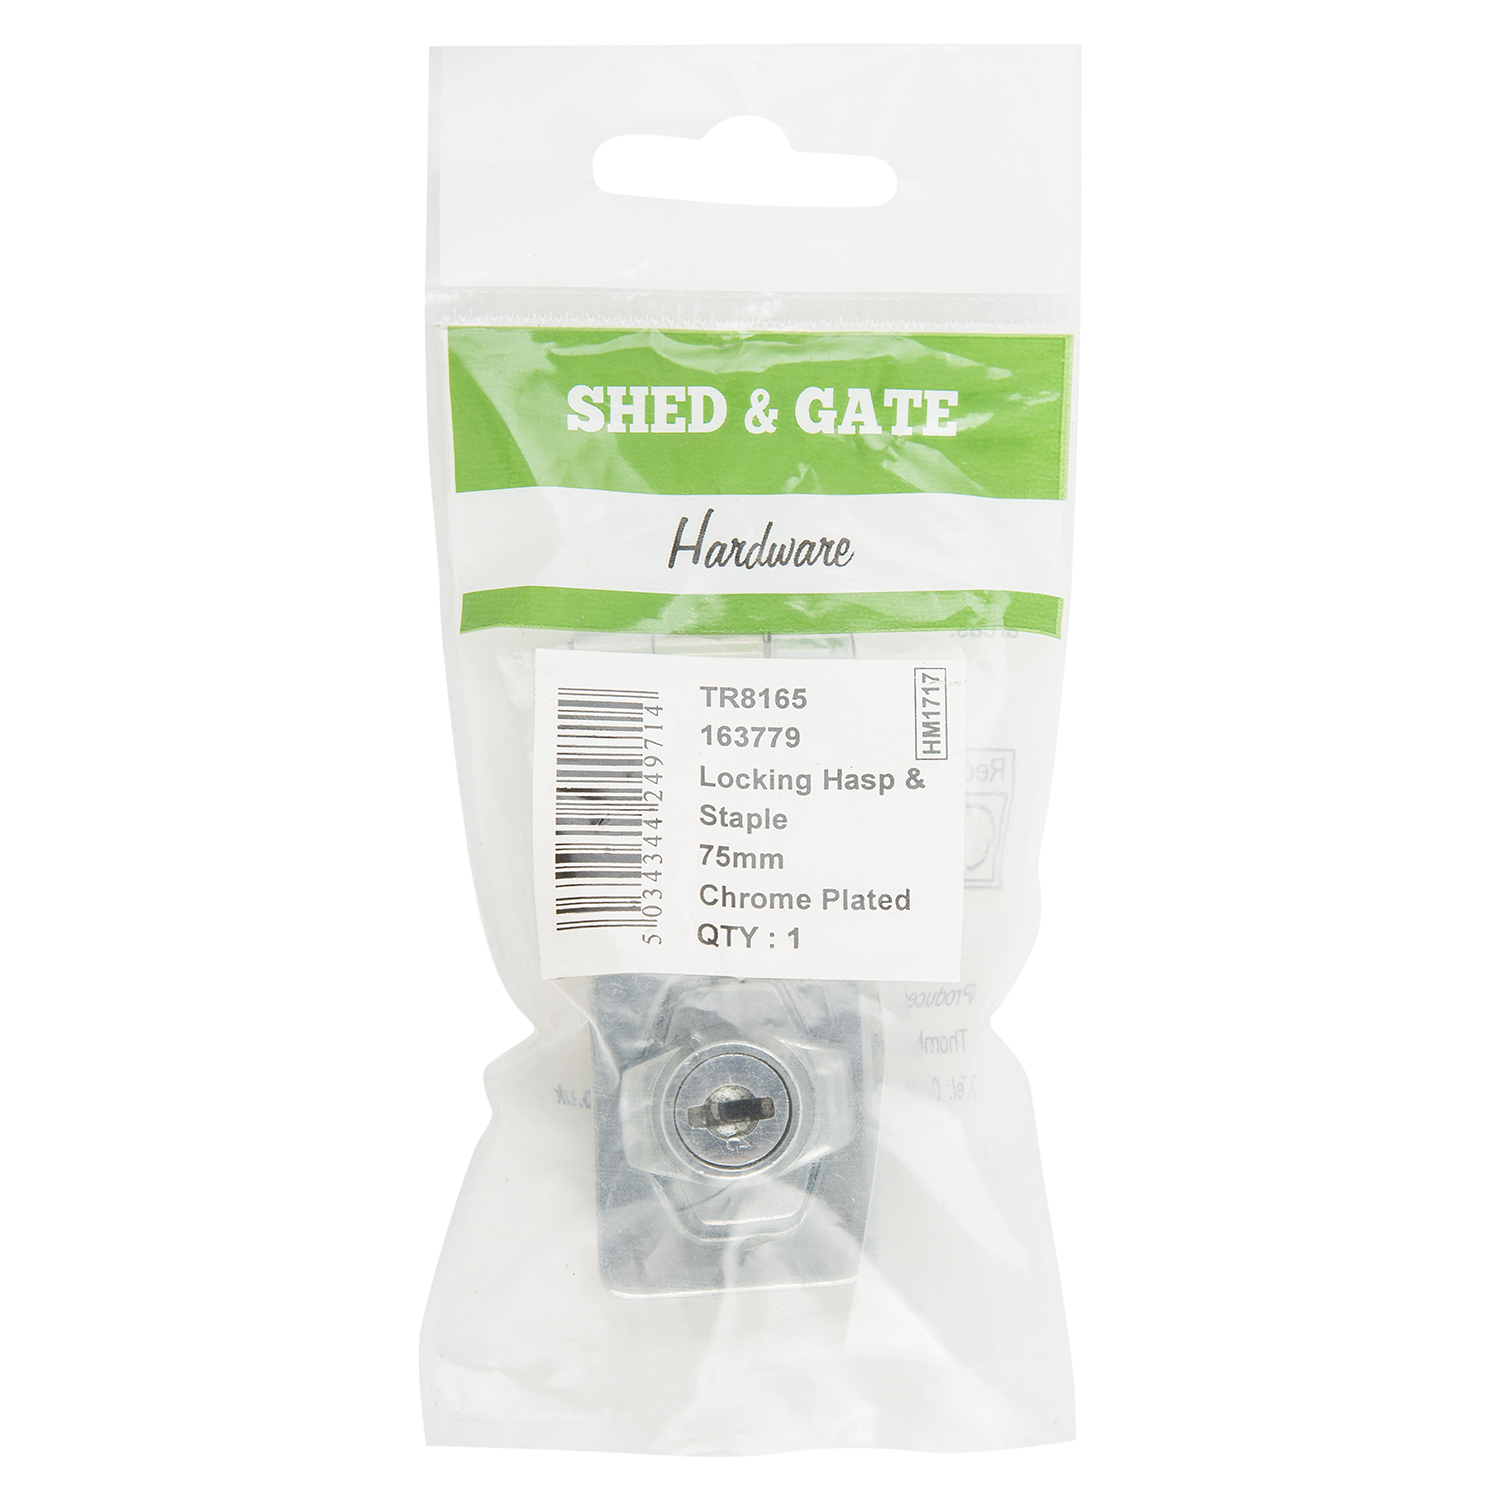 Hiatt 75mm Shed and Gate Locking Hasp and Staple Image 1